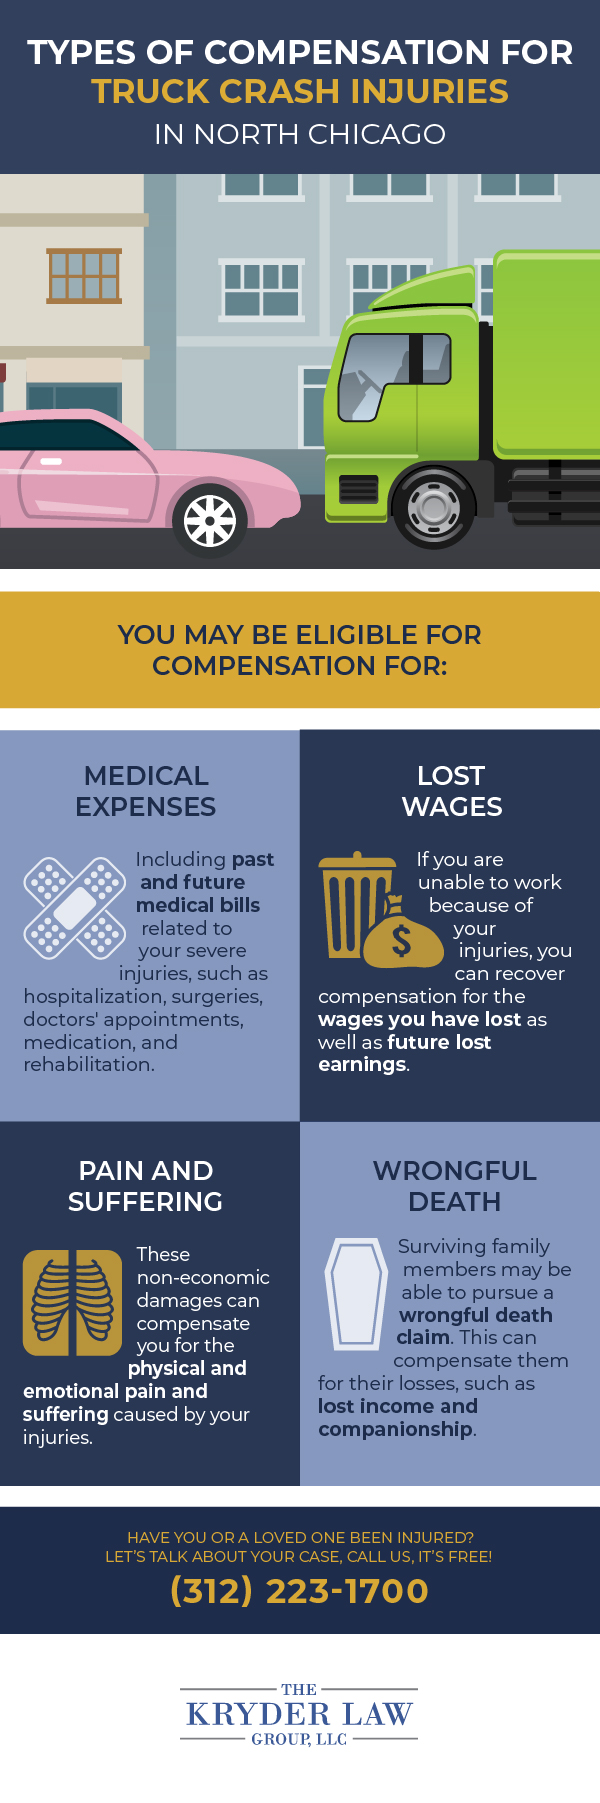 The Benefits of Hiring a North Chicago Truck Accident Lawyer Infographic